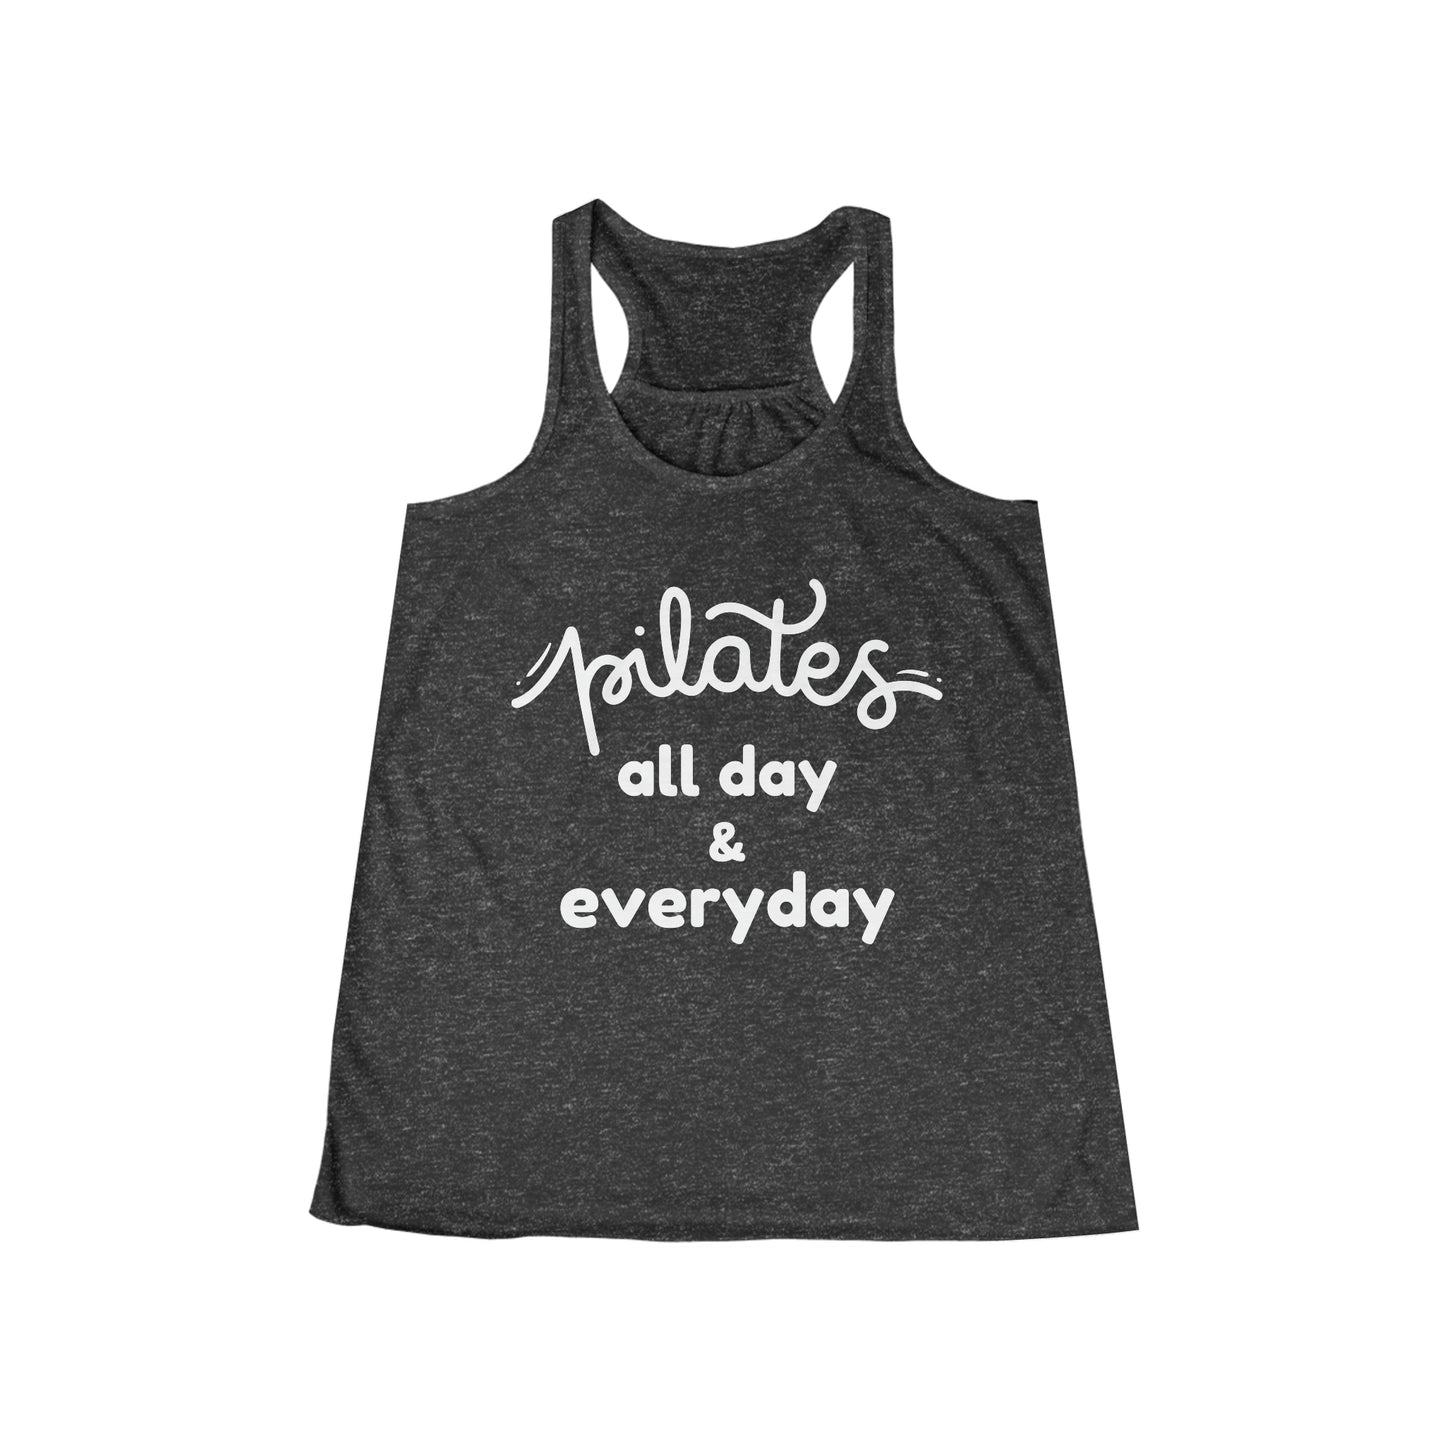 Pilates All Day And Everyday Tank Top